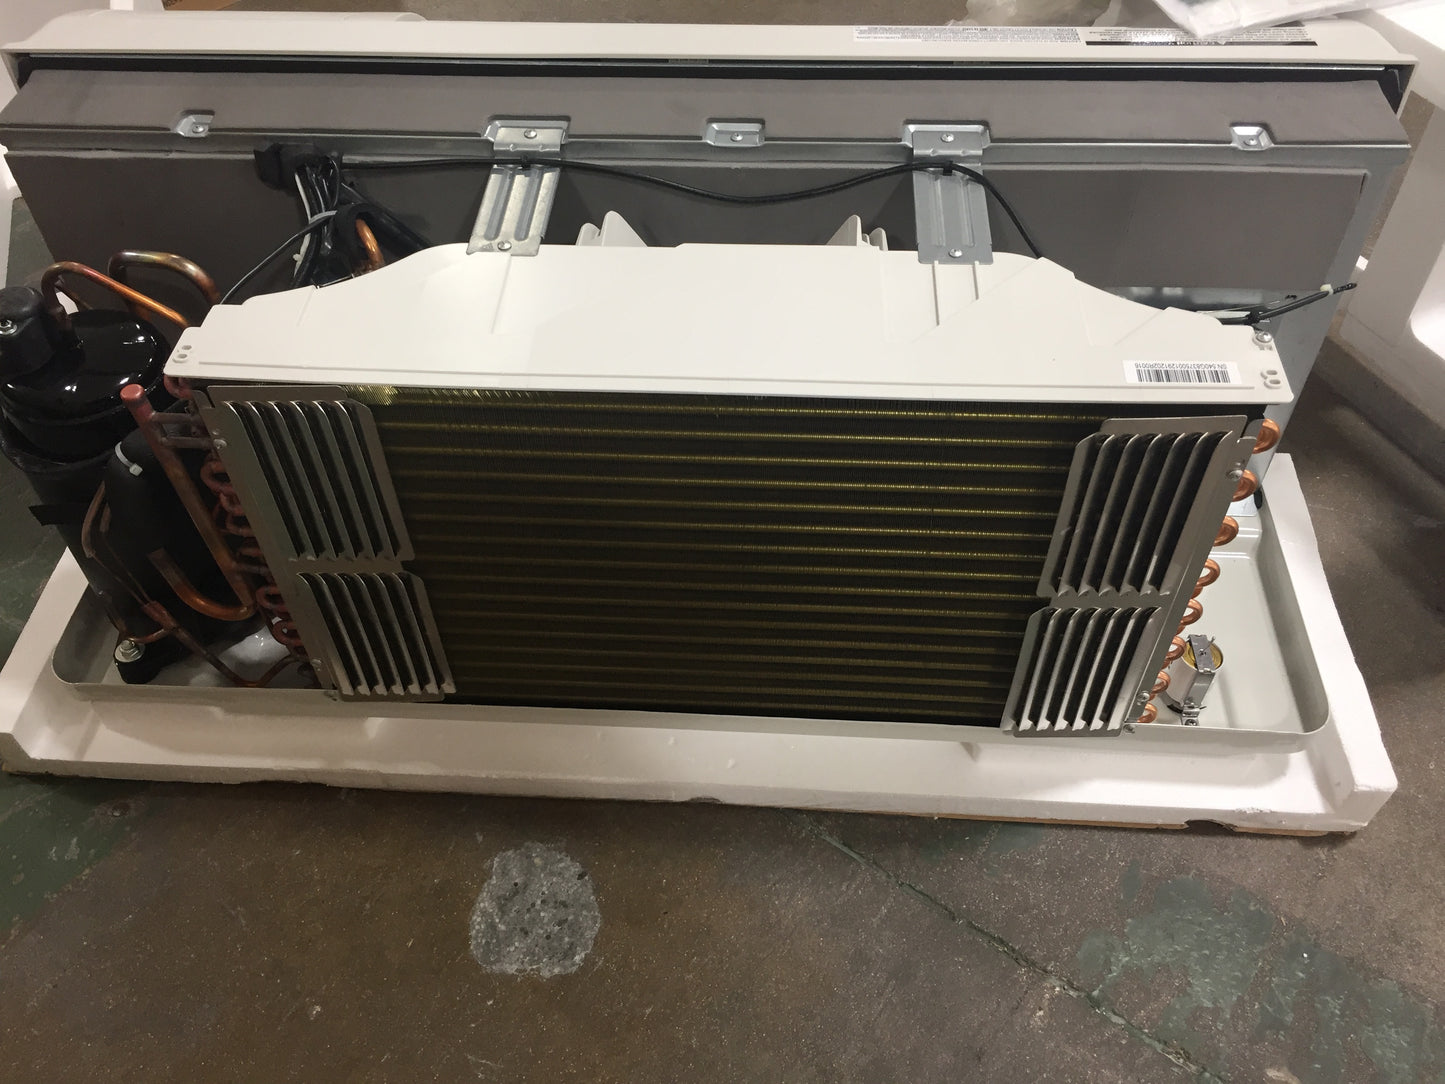 9,000 BTU HIGH EFFICIENCY PACKED TERMINAL AIR CONDITIONING UNIT WITH 3KW ELEC HEAT, VOLTS:208/230, HERTZ:60, PHASE: 1